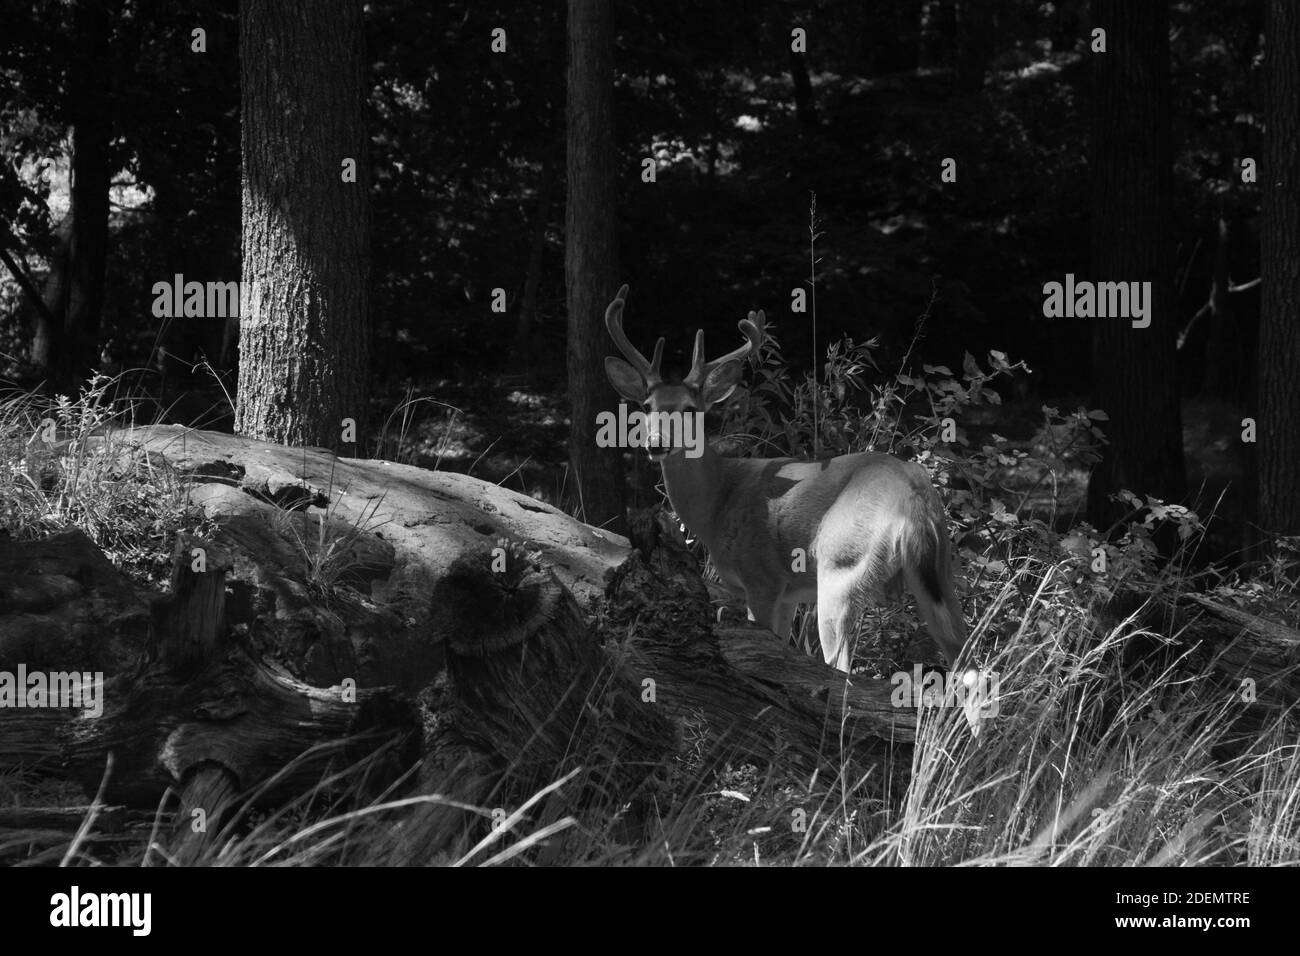 WOODLAND PARK, UNITED STATES - Sep 20, 2020: stag in the woods in summer b&w taking on 9/18/2020 Stock Photo